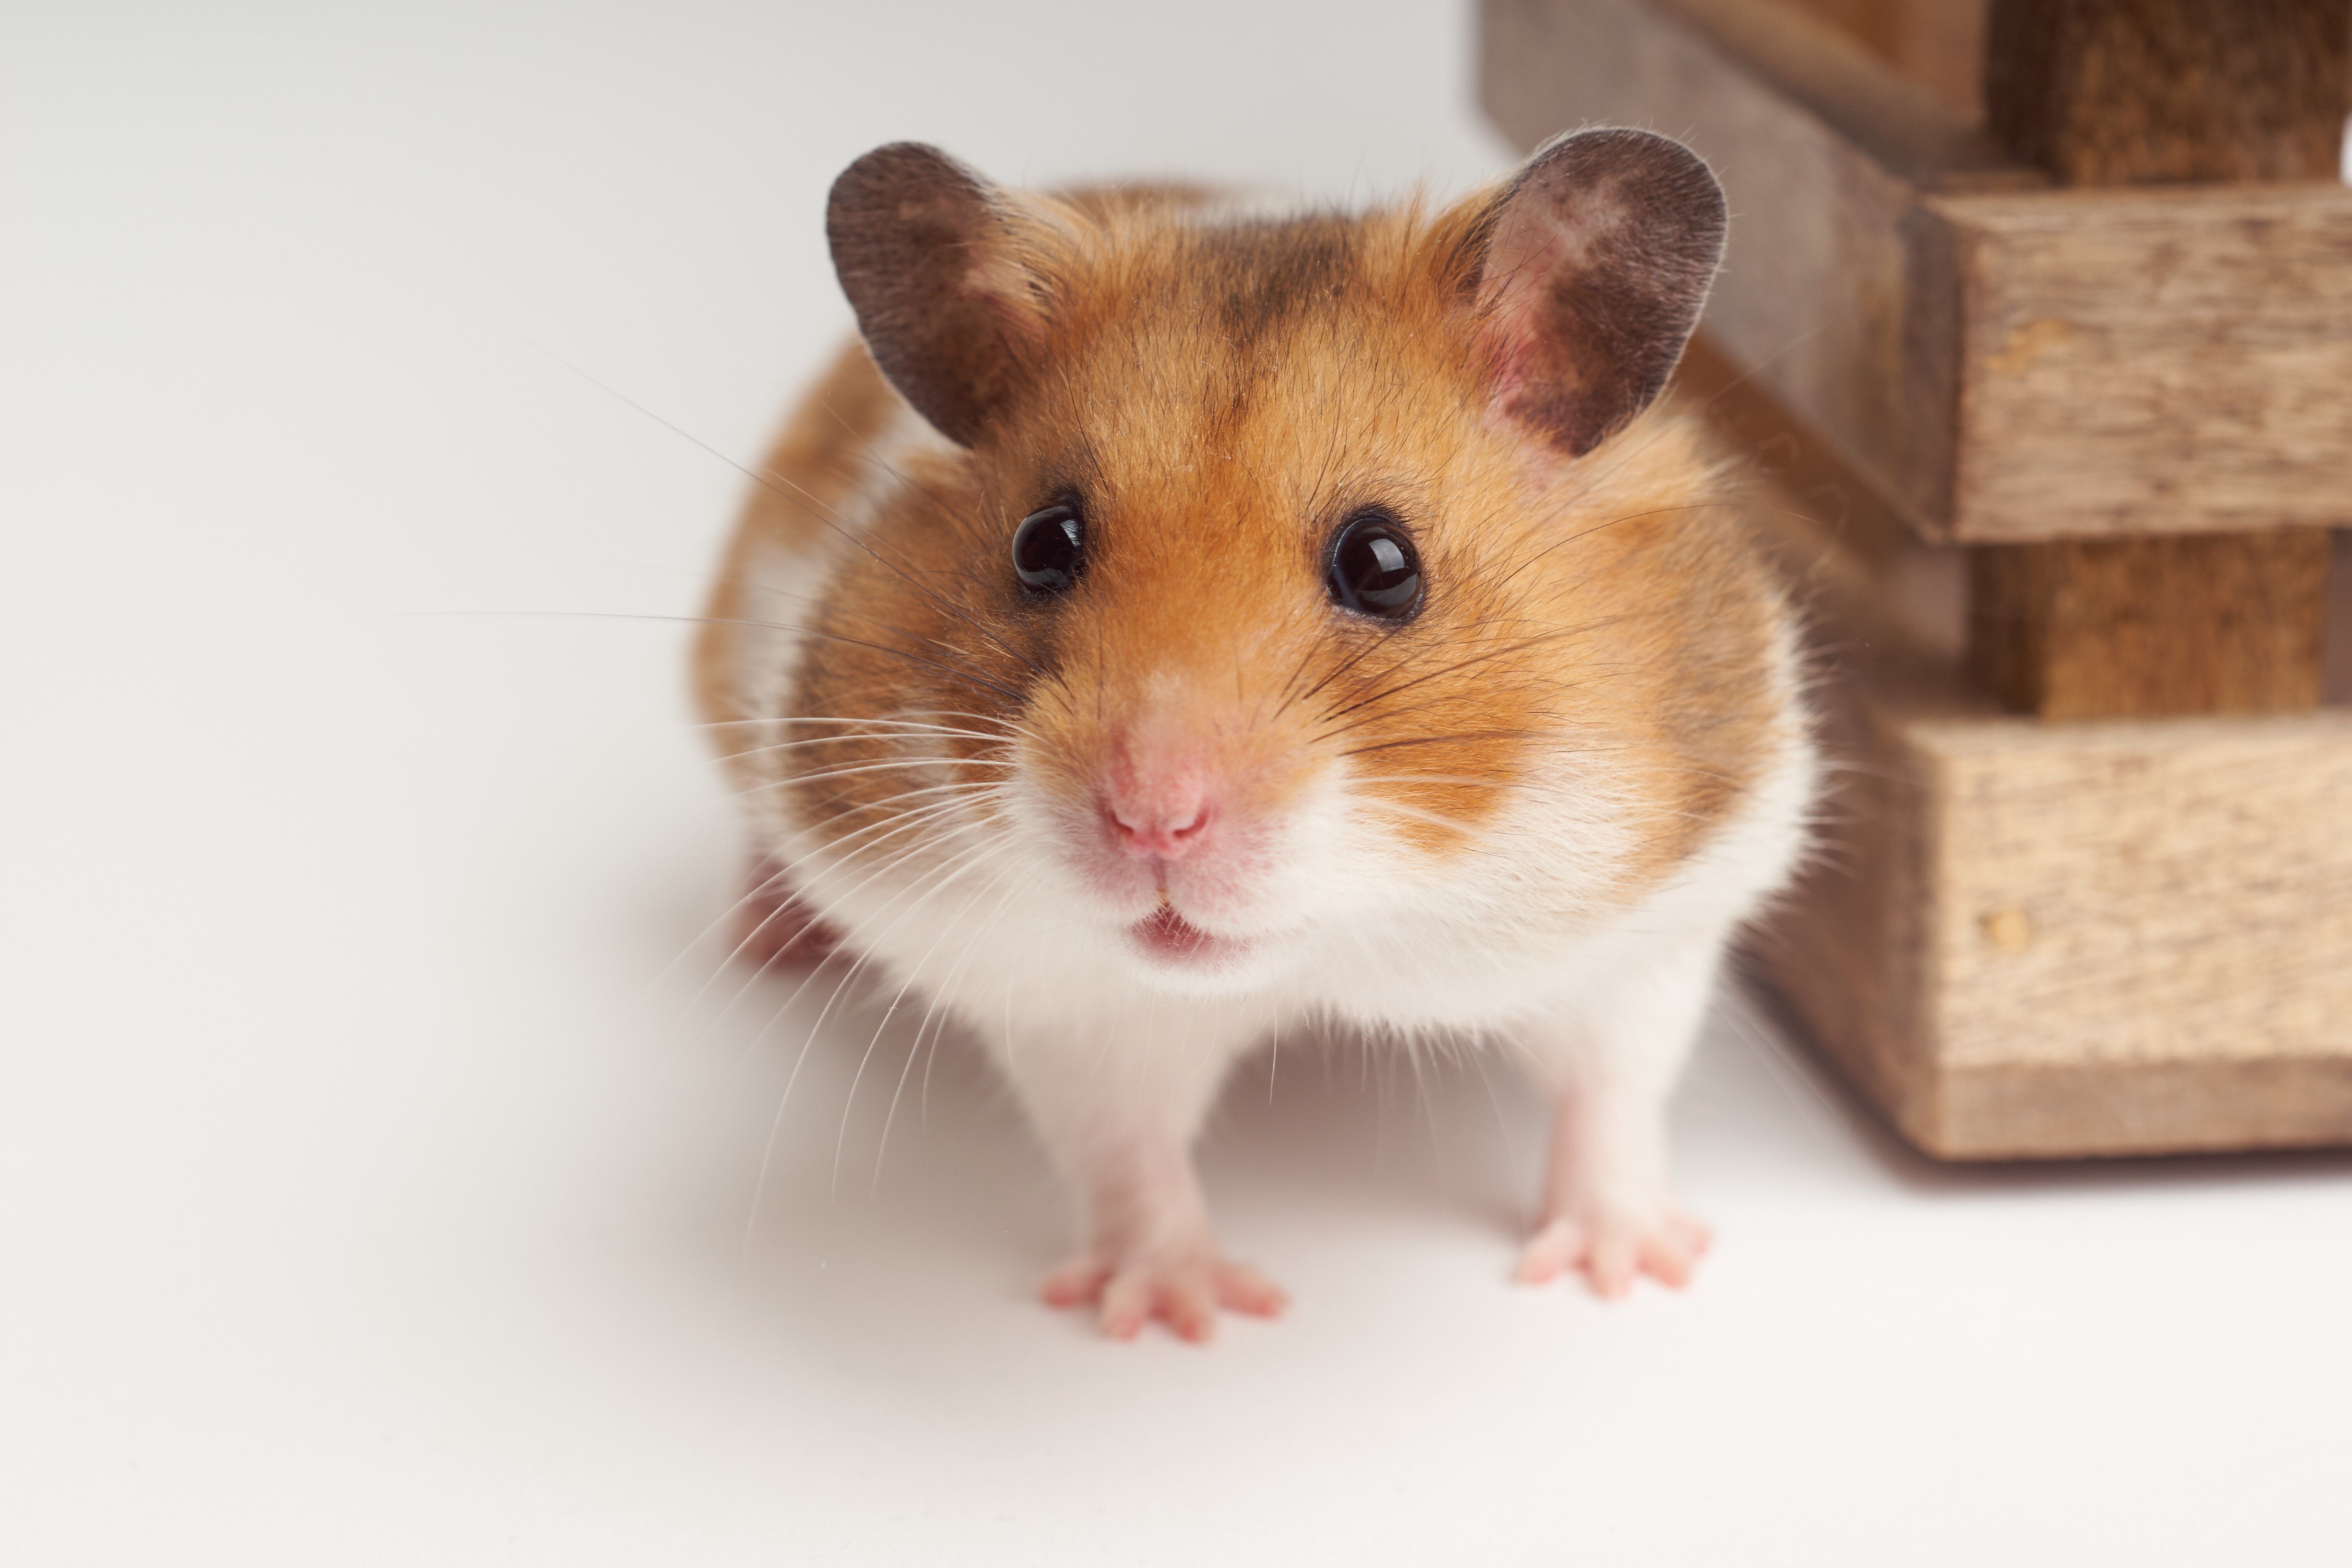 Are Hamsters a 'Good Pet'?